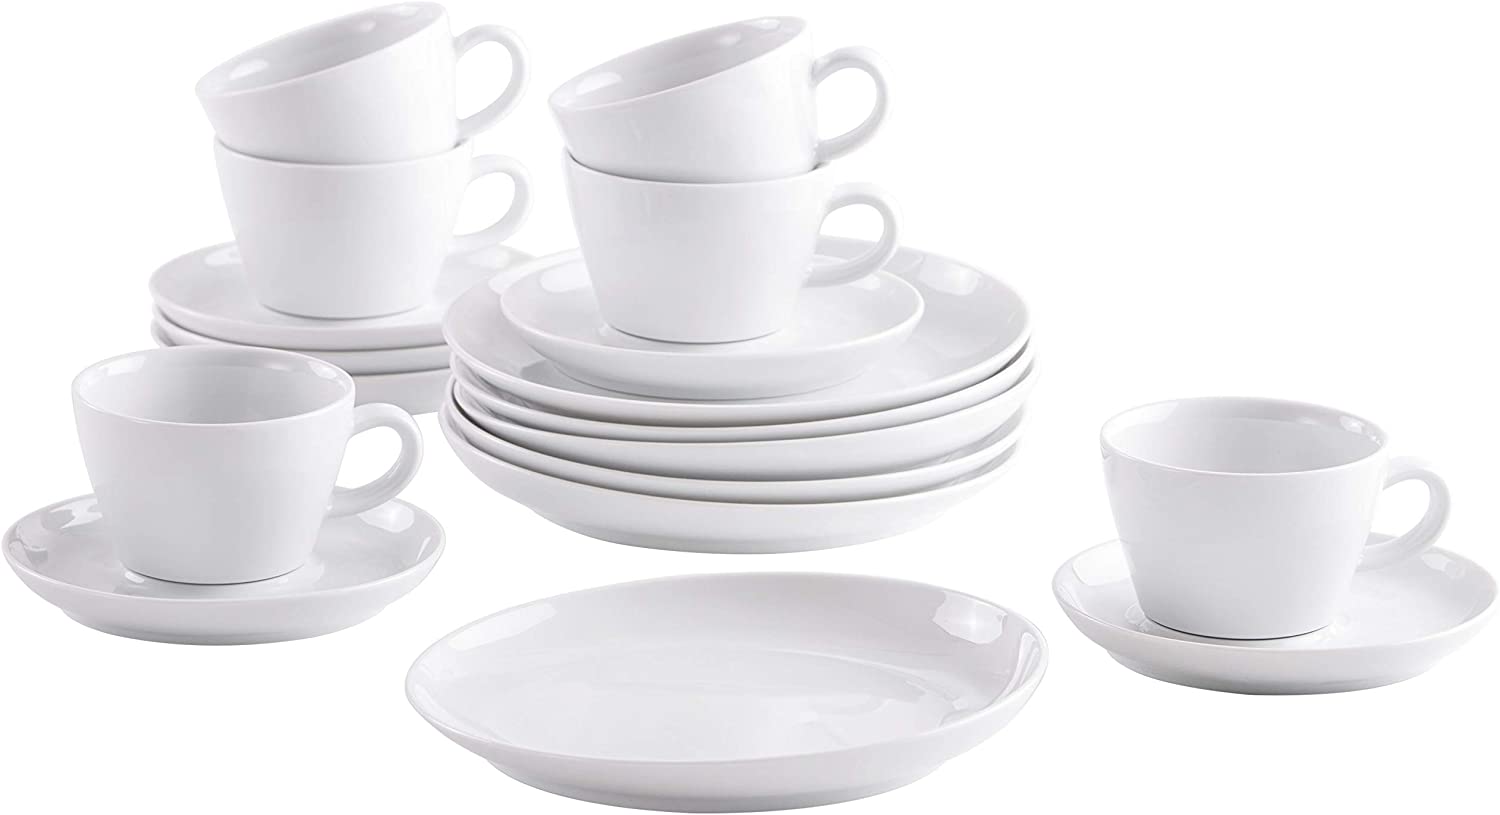 Kahla 390453M90039C Five Senses White Modern Coffee Service for 6 People Coffee Set 18 Pieces Breakfast Set Cups Snack Plate Saucer